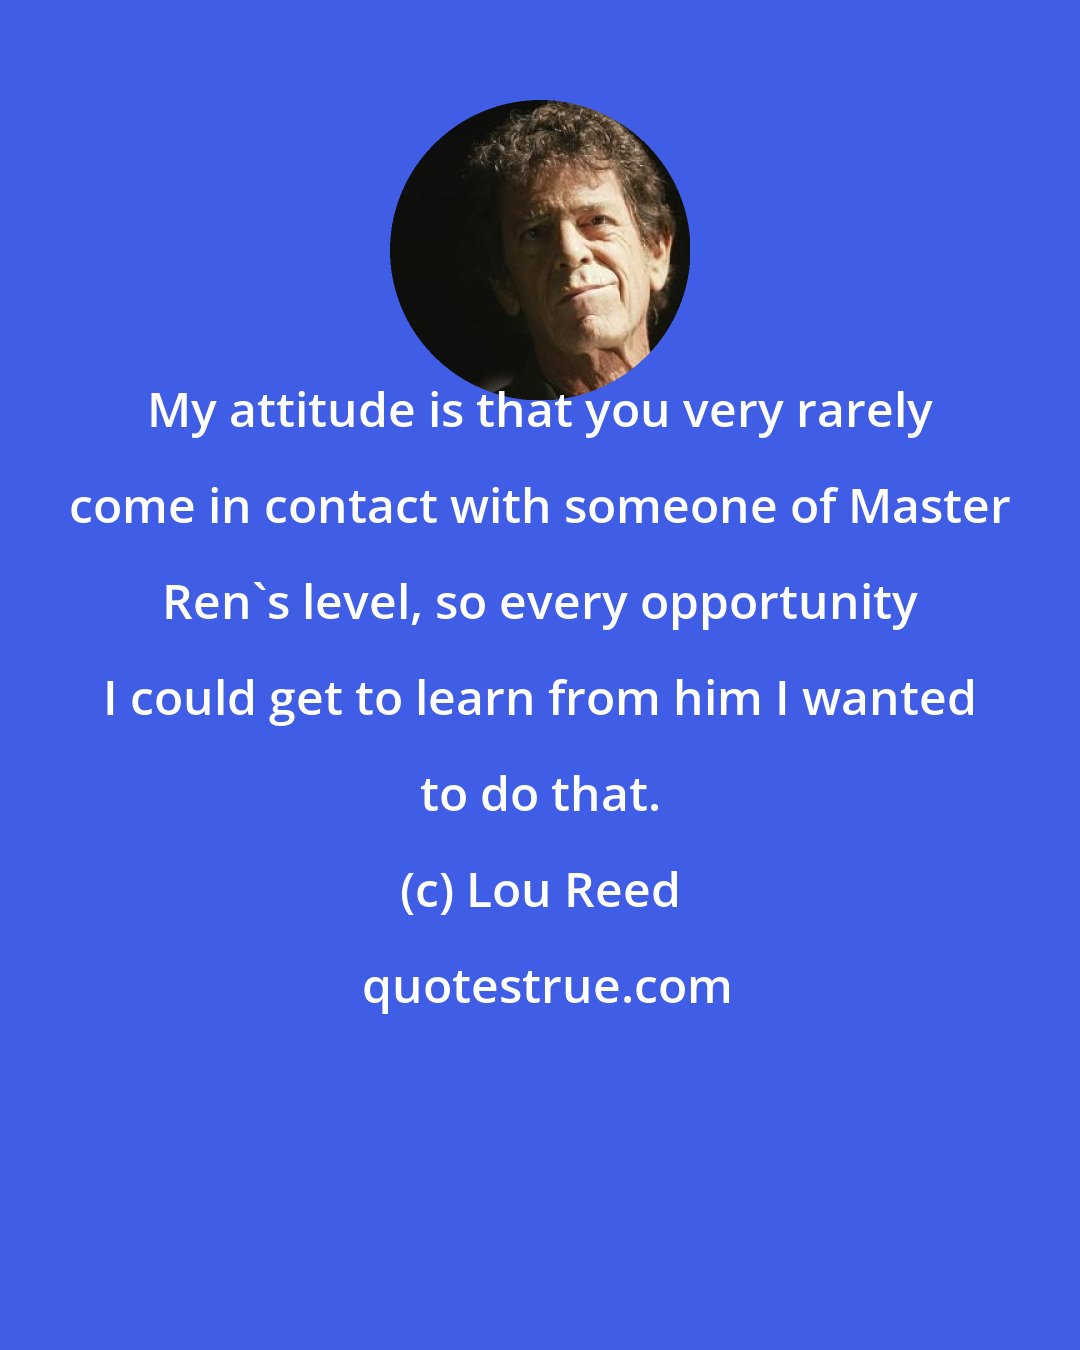 Lou Reed: My attitude is that you very rarely come in contact with someone of Master Ren's level, so every opportunity I could get to learn from him I wanted to do that.